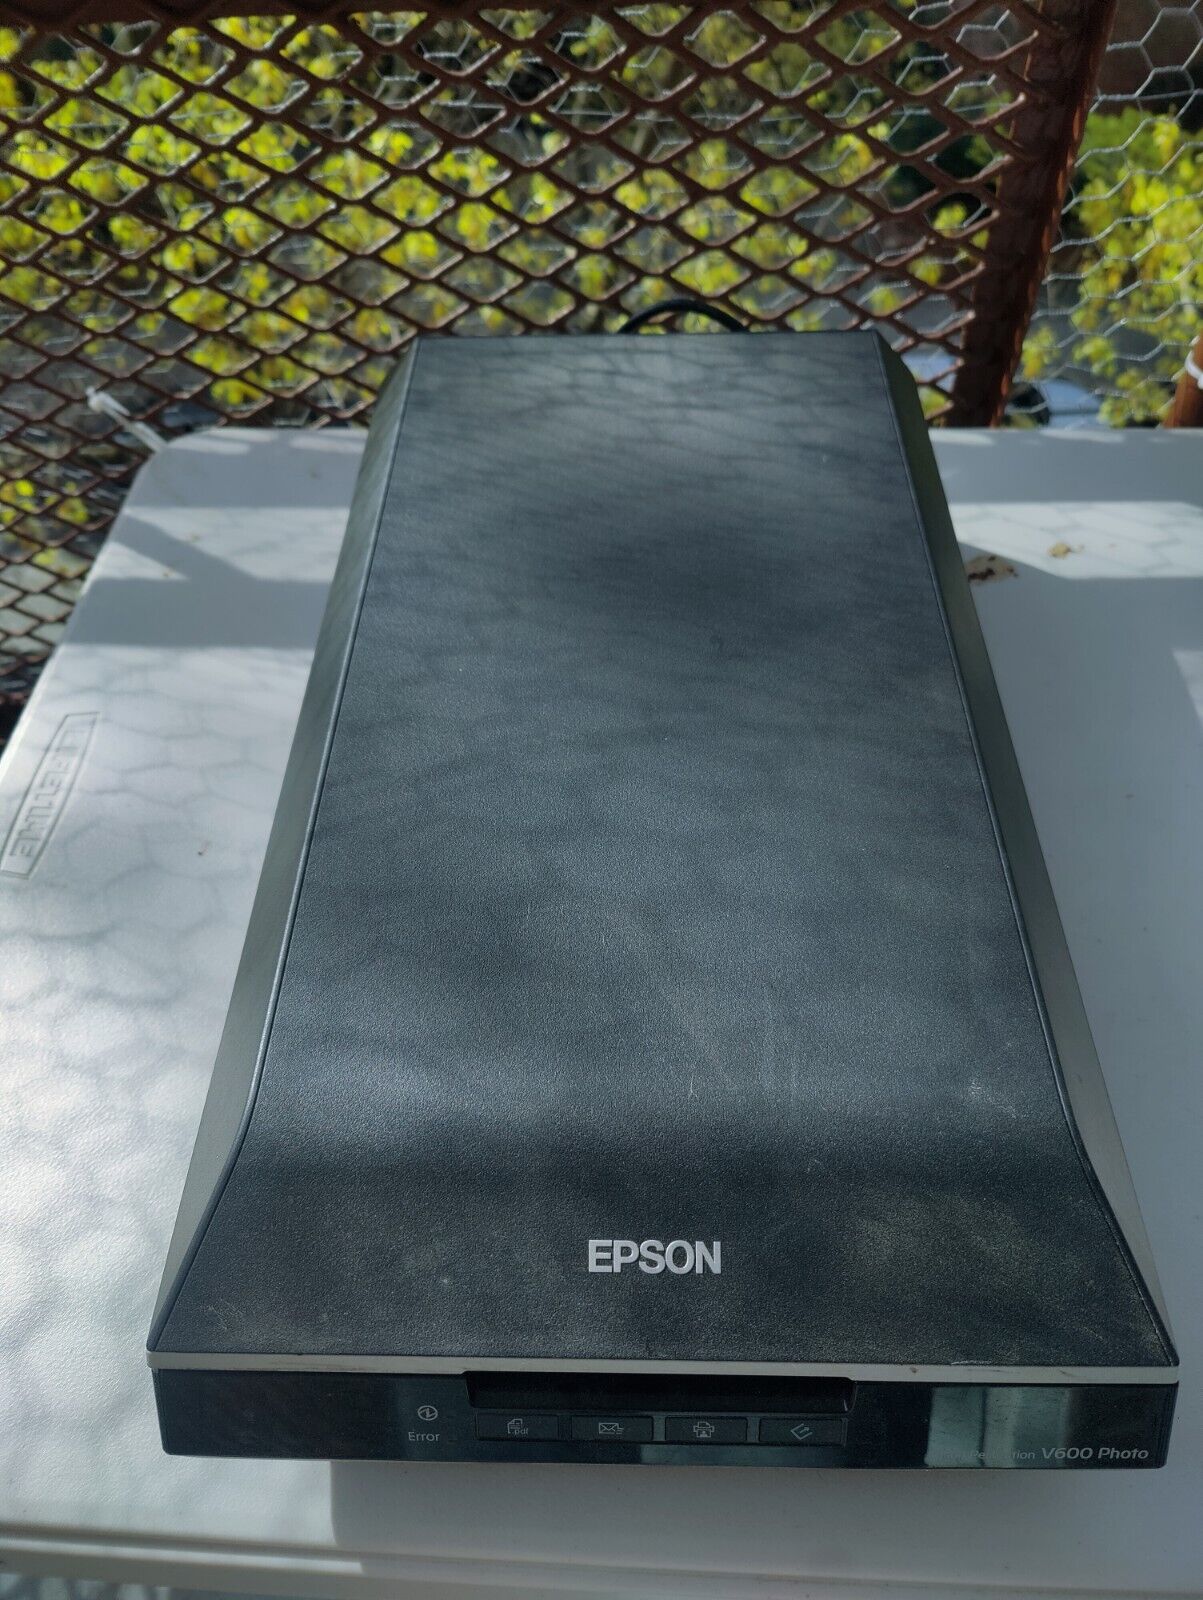 Epson Perfection V600 Photo Scanner -NO POWER CORD 